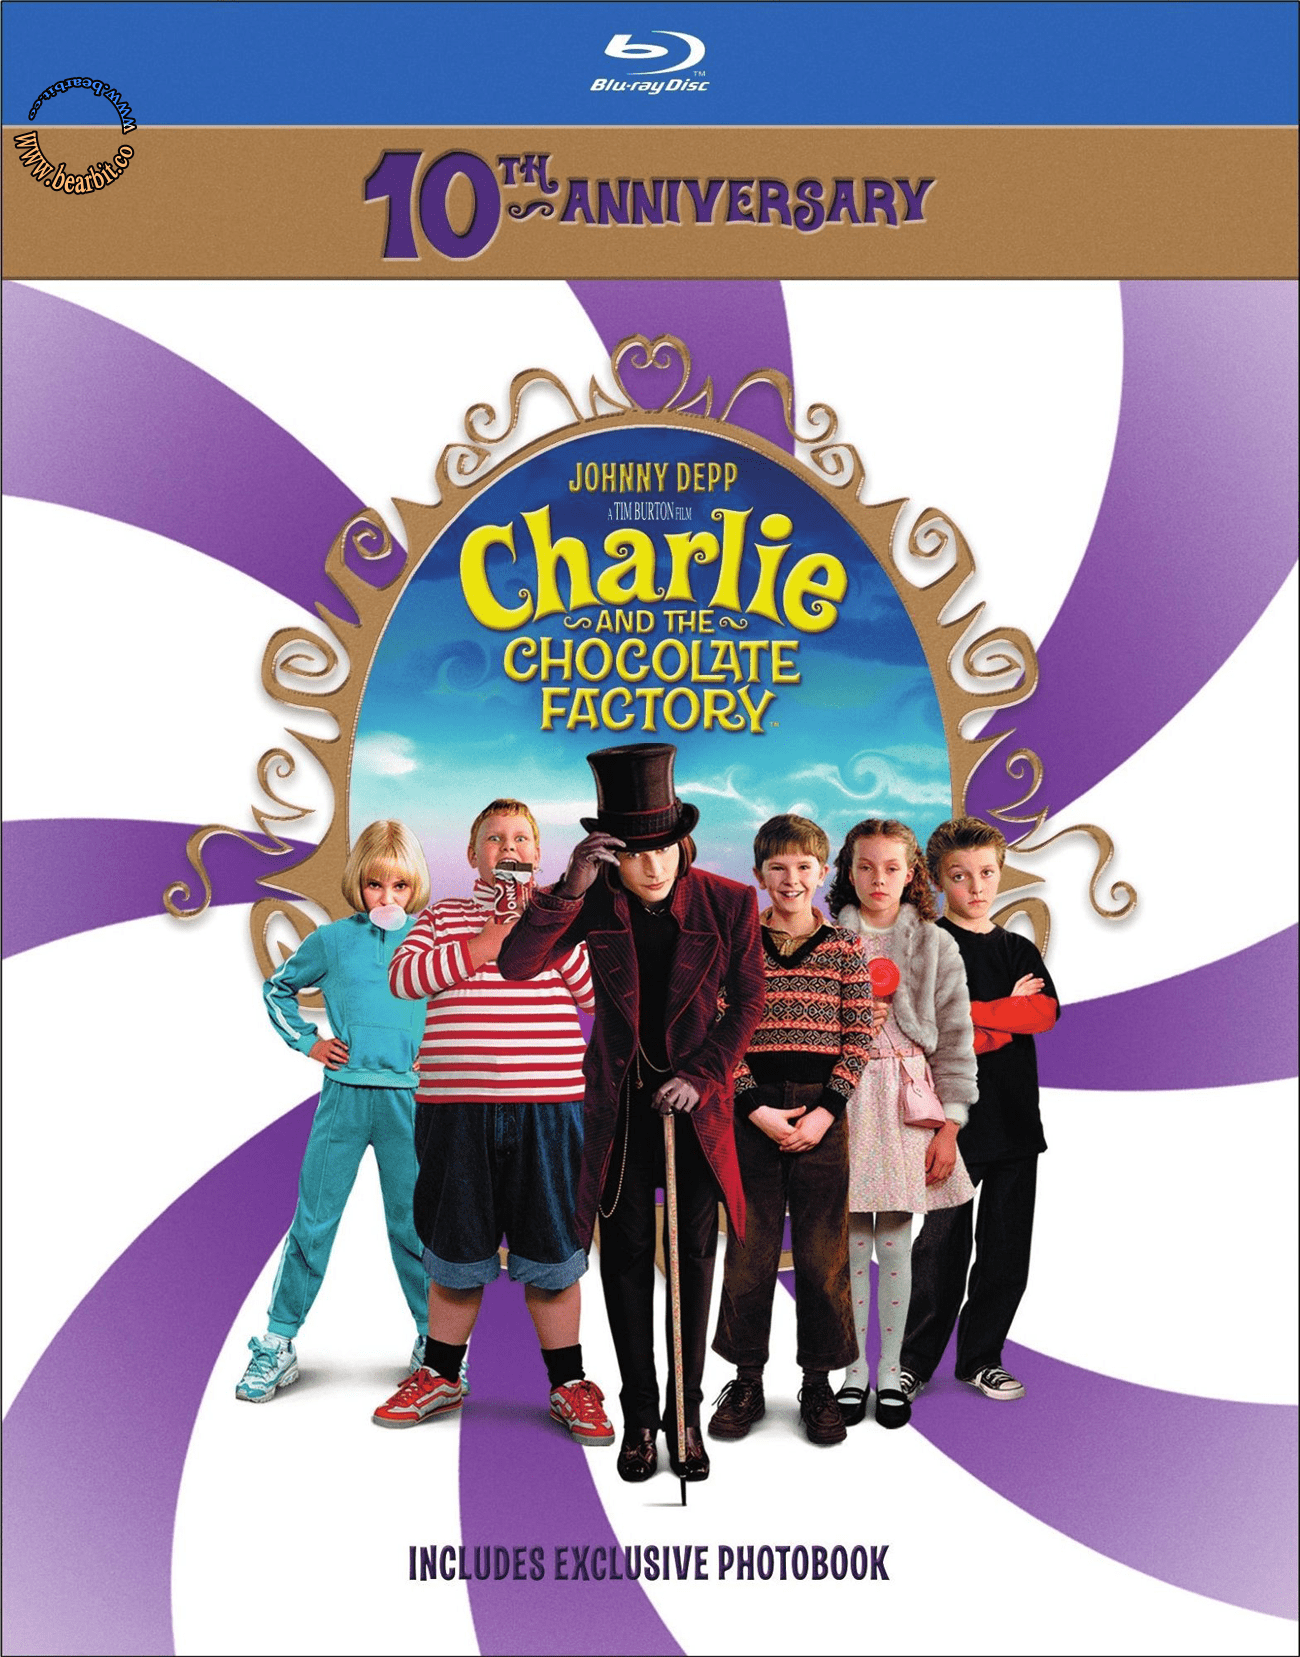 []-[* 1080p Super HQ 硤سҾ٧! *]Charlie and The Chocolate Factory (2005) :  Ѻ çҹ͡ŵ  [§ѧ DD 5.1-EX + ҡ DD 5.1-EX Blu-Ray Master]  [: -ѧ Master + Ѻ PGS Ѵ]